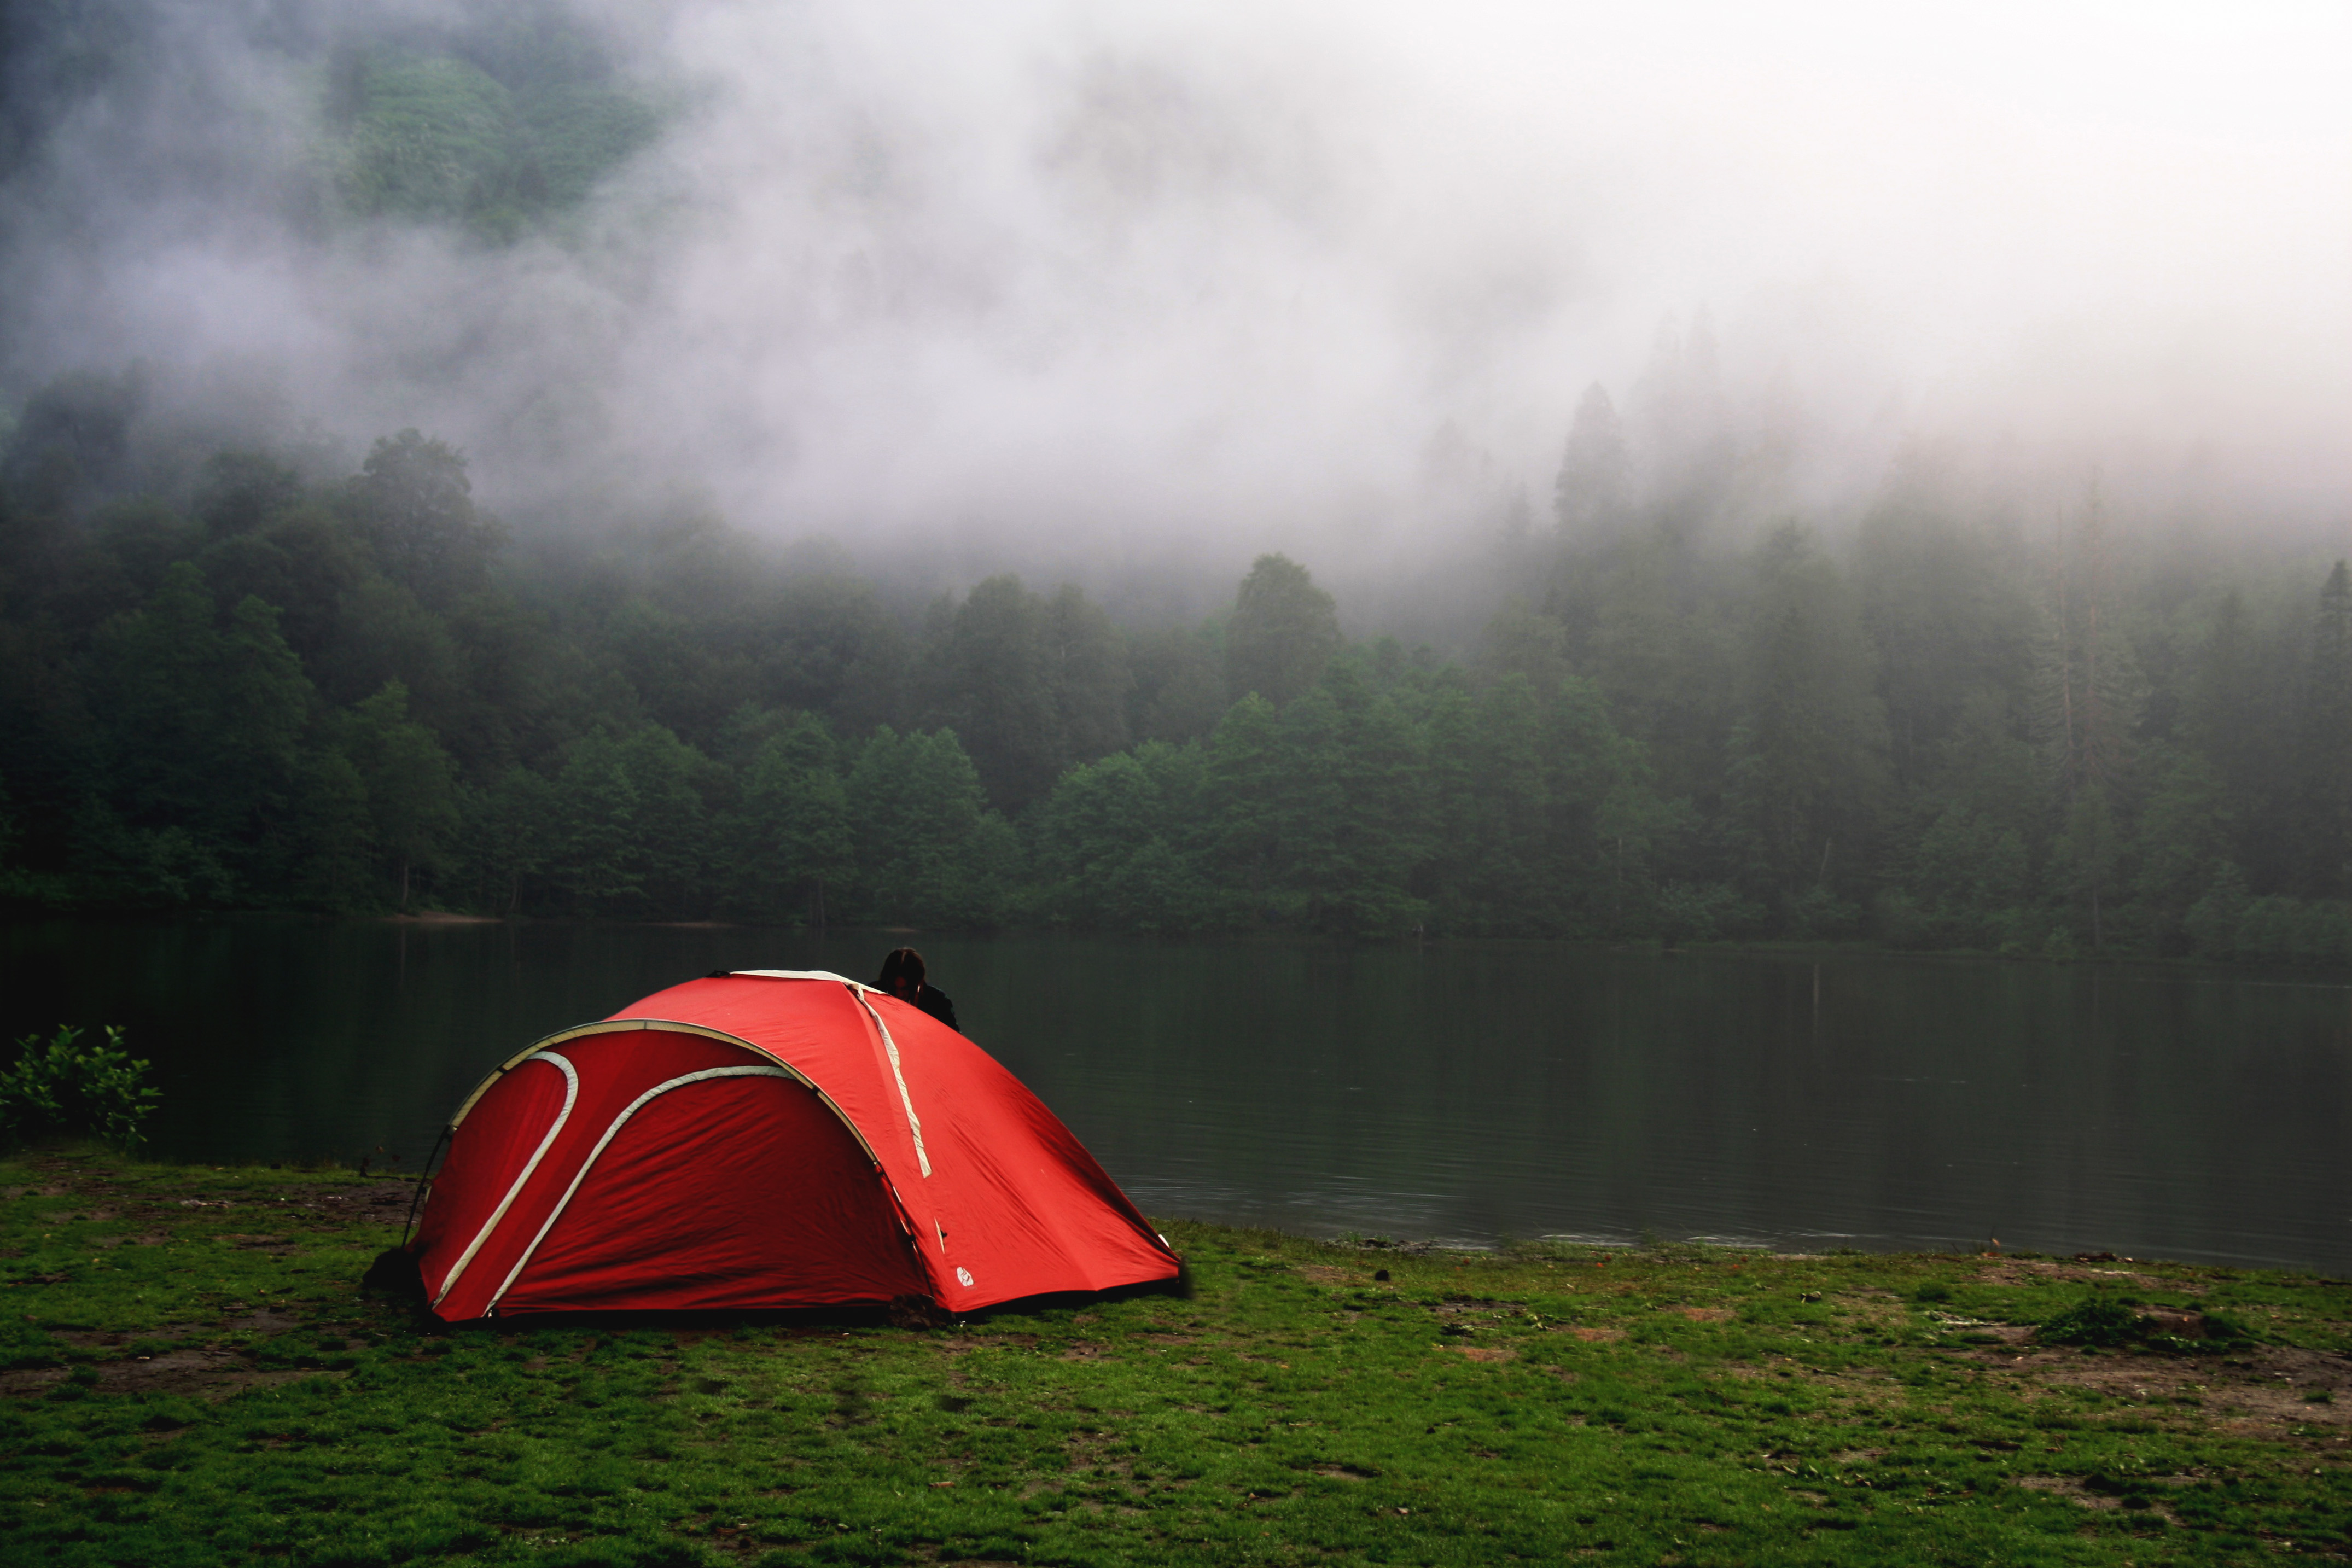 Download Camping by Foggy Forest in Red Tent Royalty Free Stock Photo